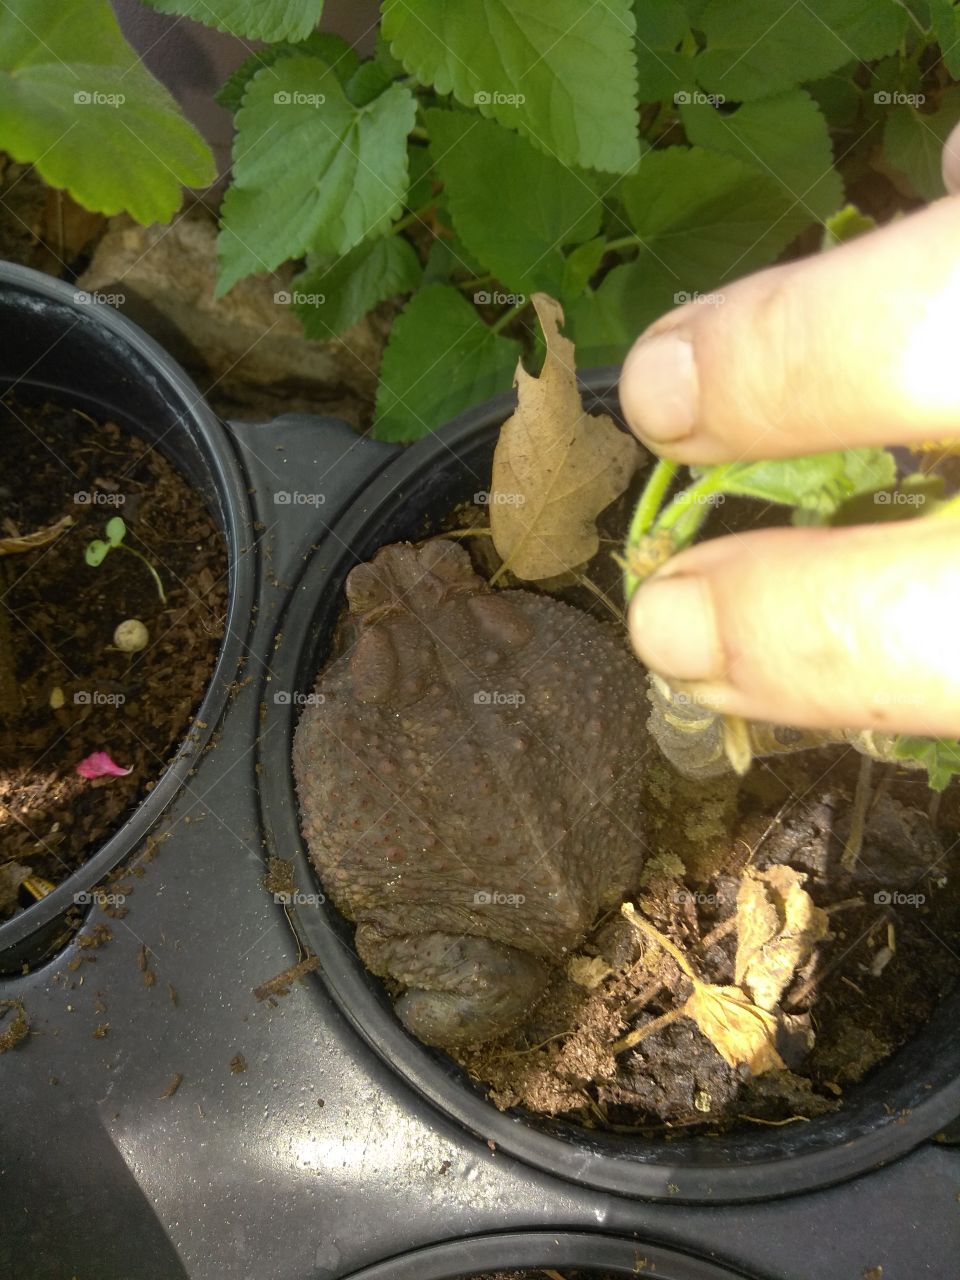 there was a big frog in a plant pot lol he was interesting